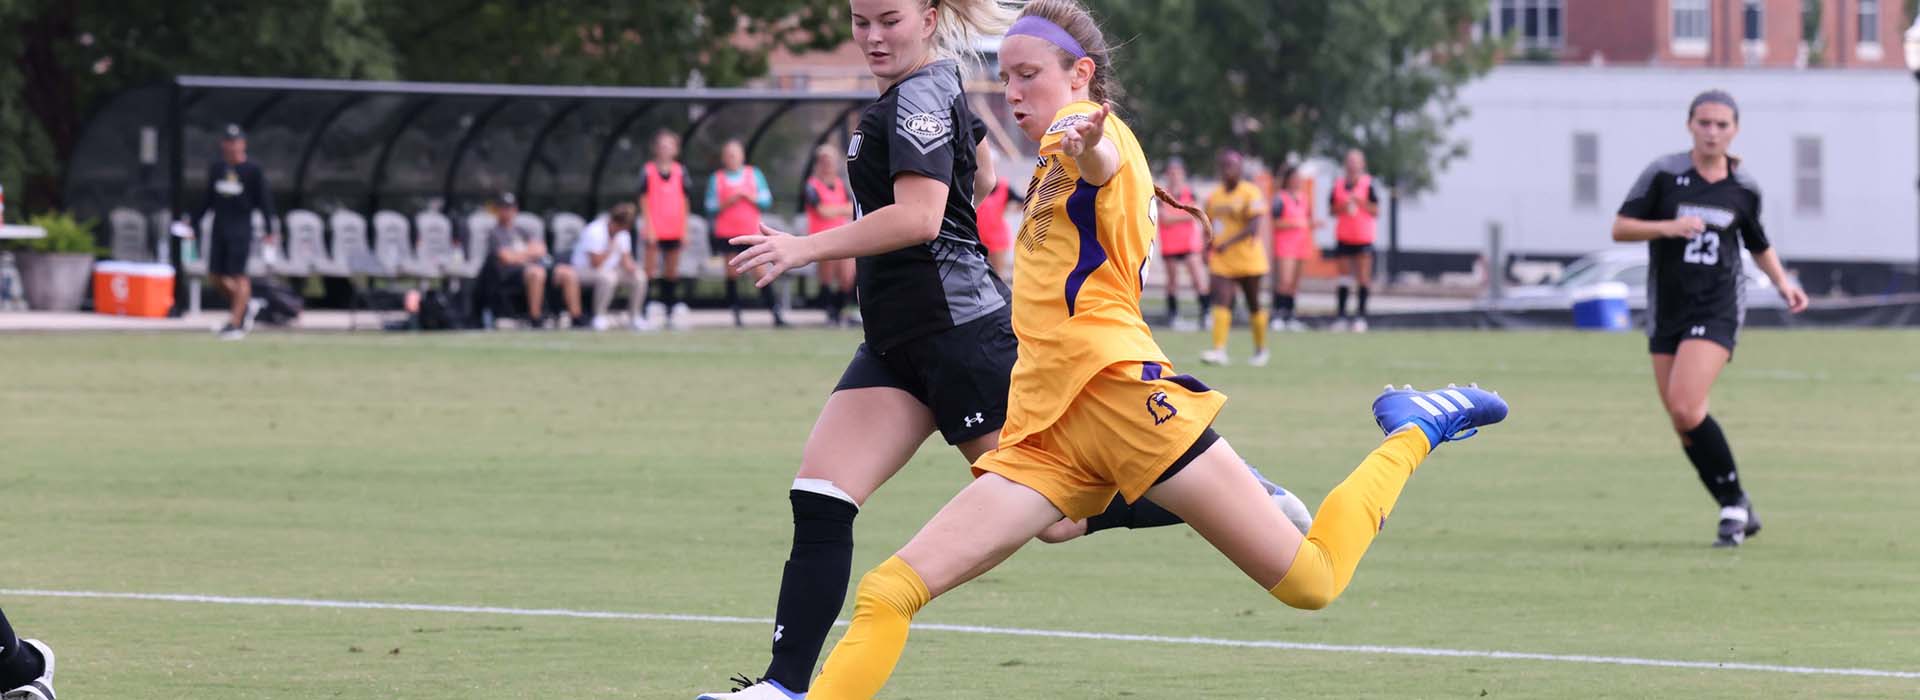 Tech scores late to force 2-2 tie at UT Martin